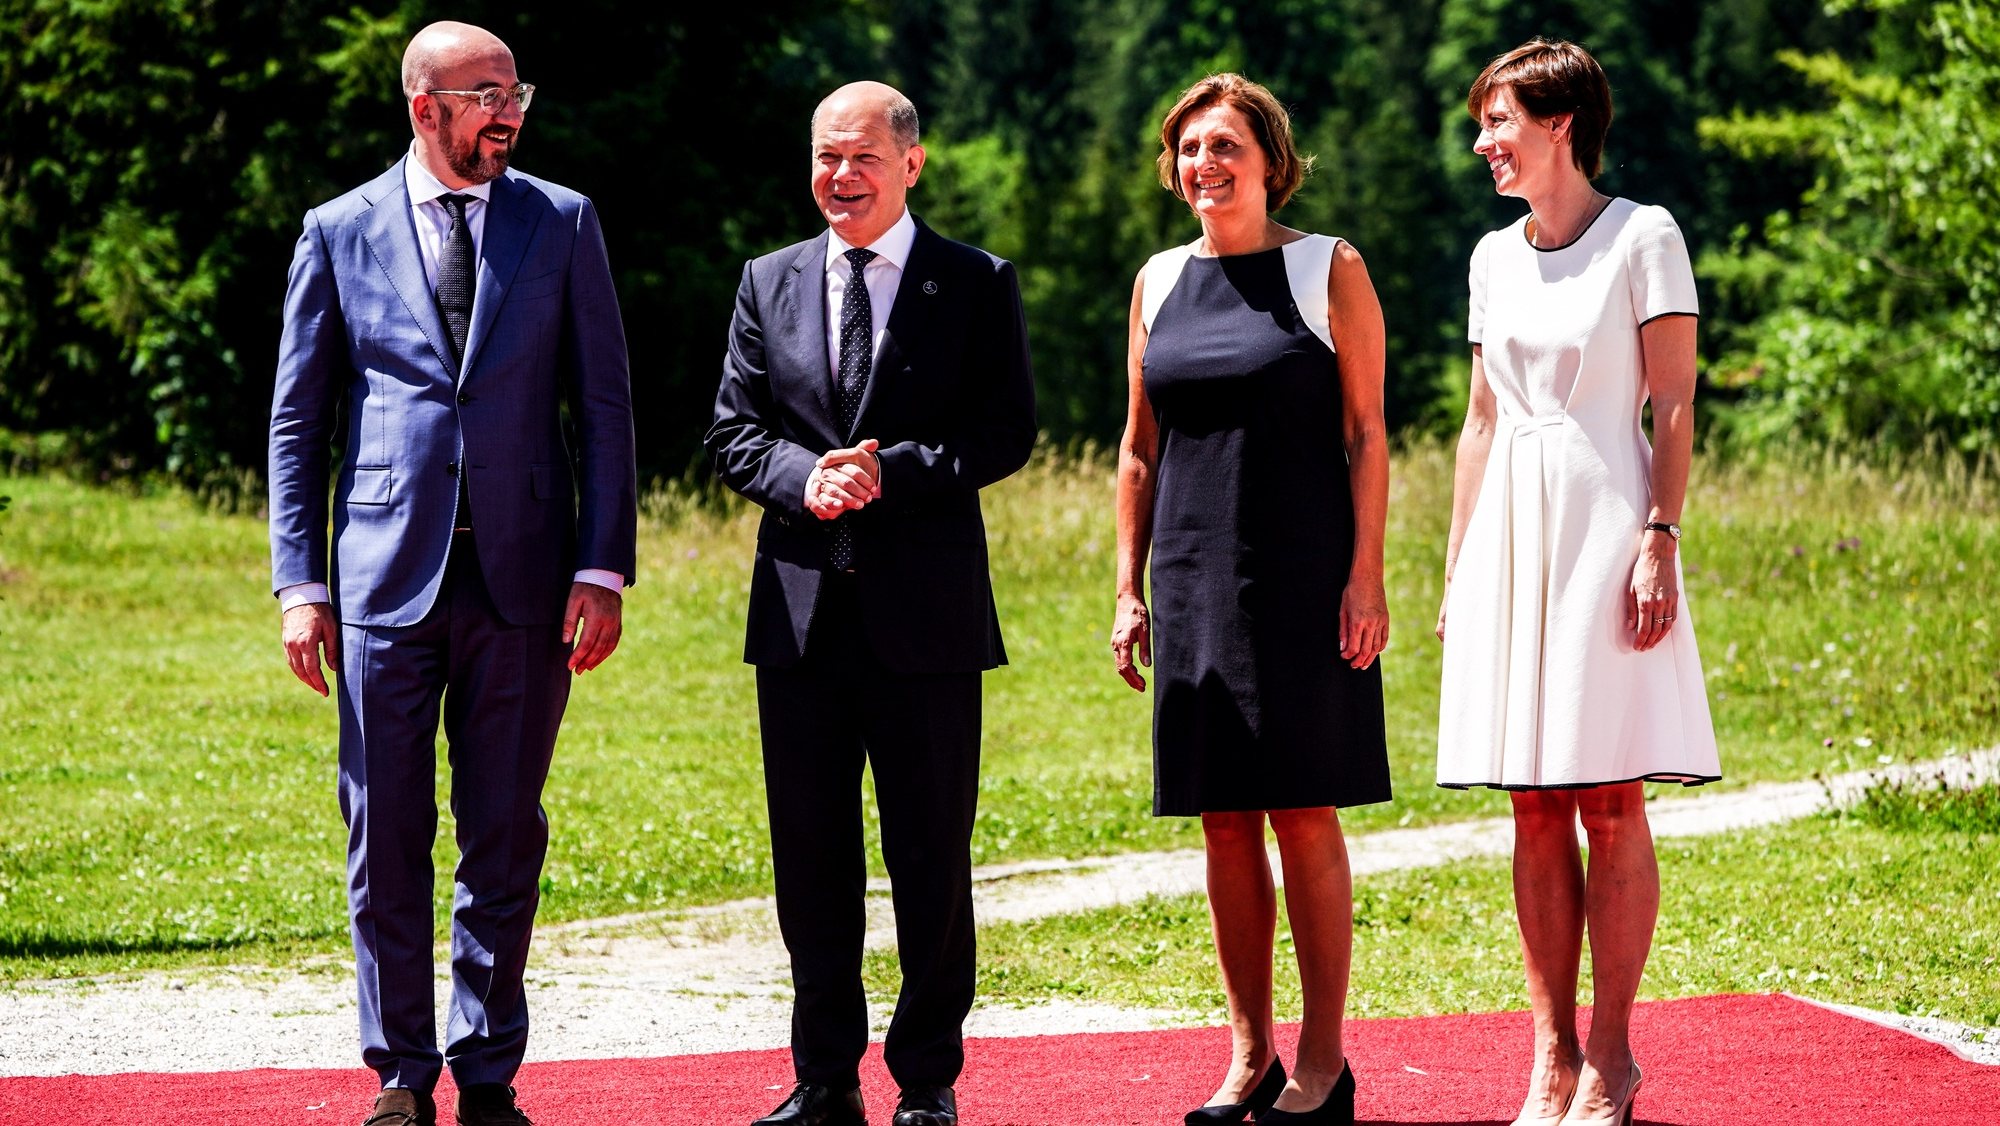 epa10034917 German Chancellor Olaf Scholz (2-L) and his wife Britta Ernst (2-R) welcome President of the European Council Charles Michel (L) and his wife Amelie Derbaudrenghien (R), at Elmau Castle in Kruen, Germany, 26 June 2022. Germany is hosting the G7 summit at Elmau Castle near Garmisch-Partenkirchen from 26 to 28 June 2022.  EPA/CLEMENS BILAN